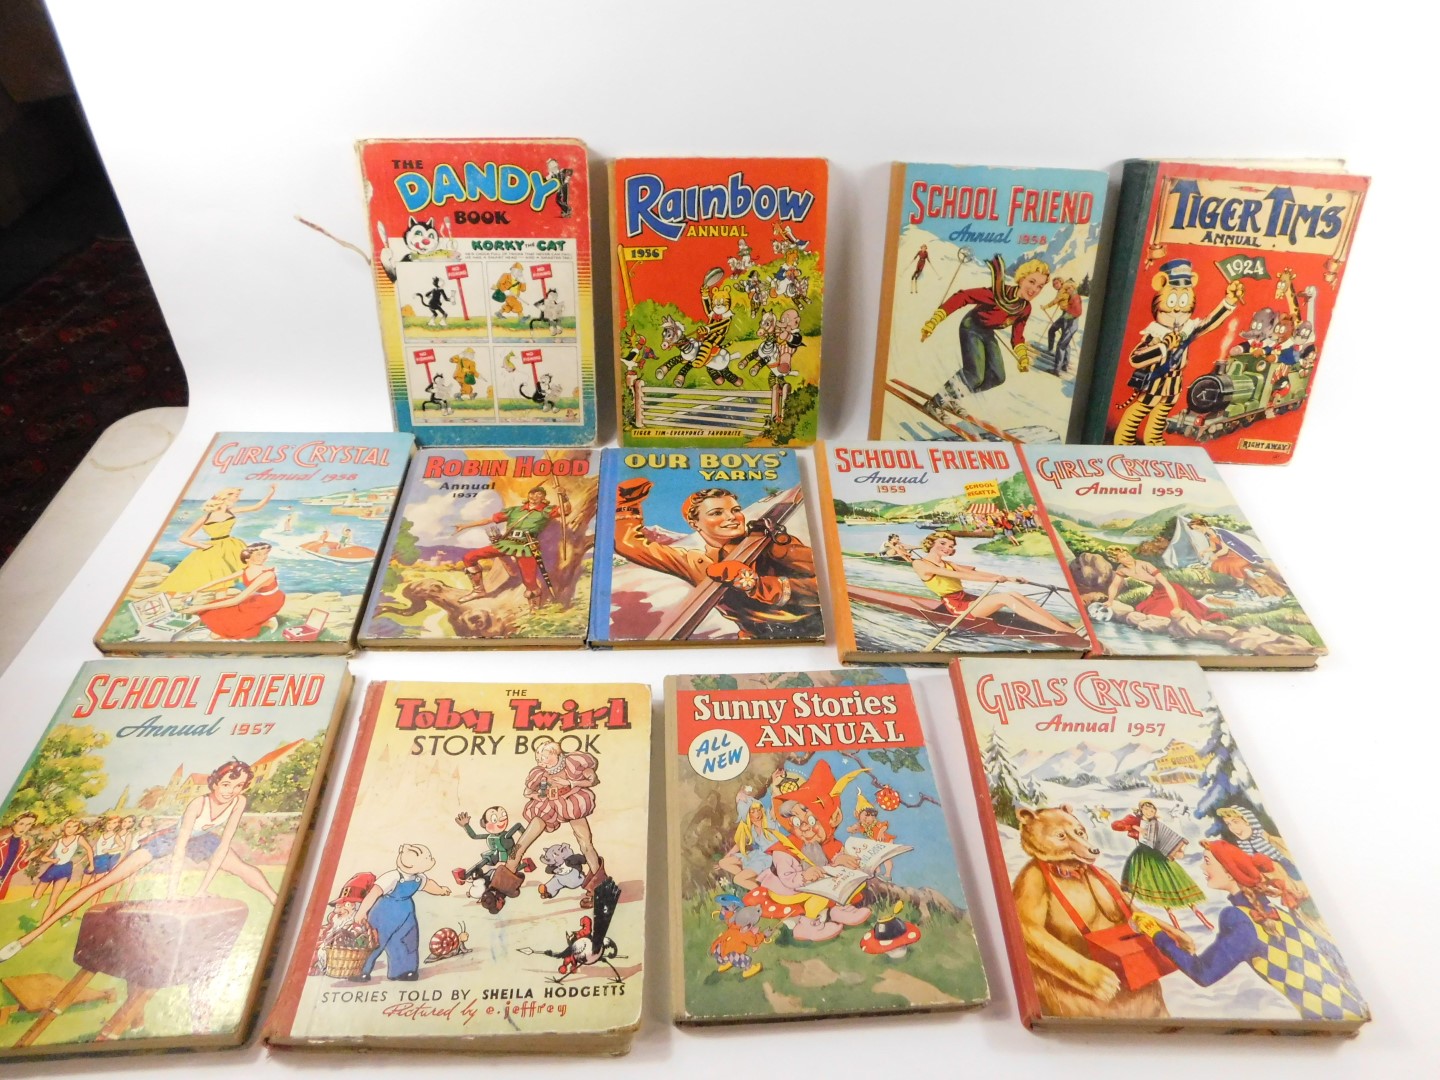 Children's annuals and story books, including Tiger Tim's Annual 1924, The Dandy Book 1955,